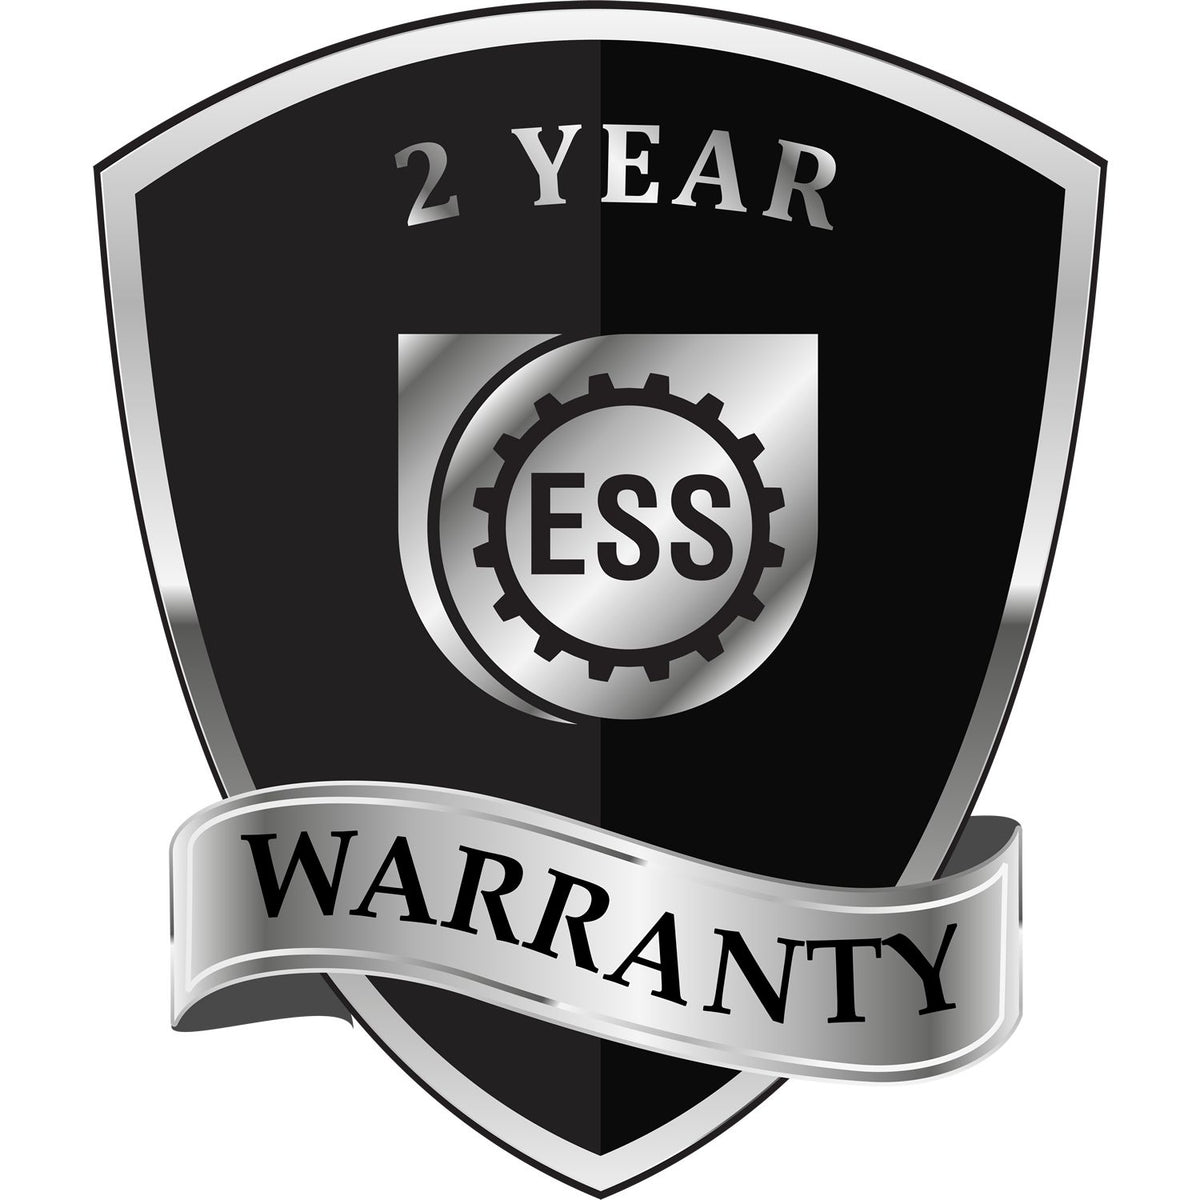 A black and silver badge or emblem showing warranty information for the Soft Illinois Professional Geologist Seal